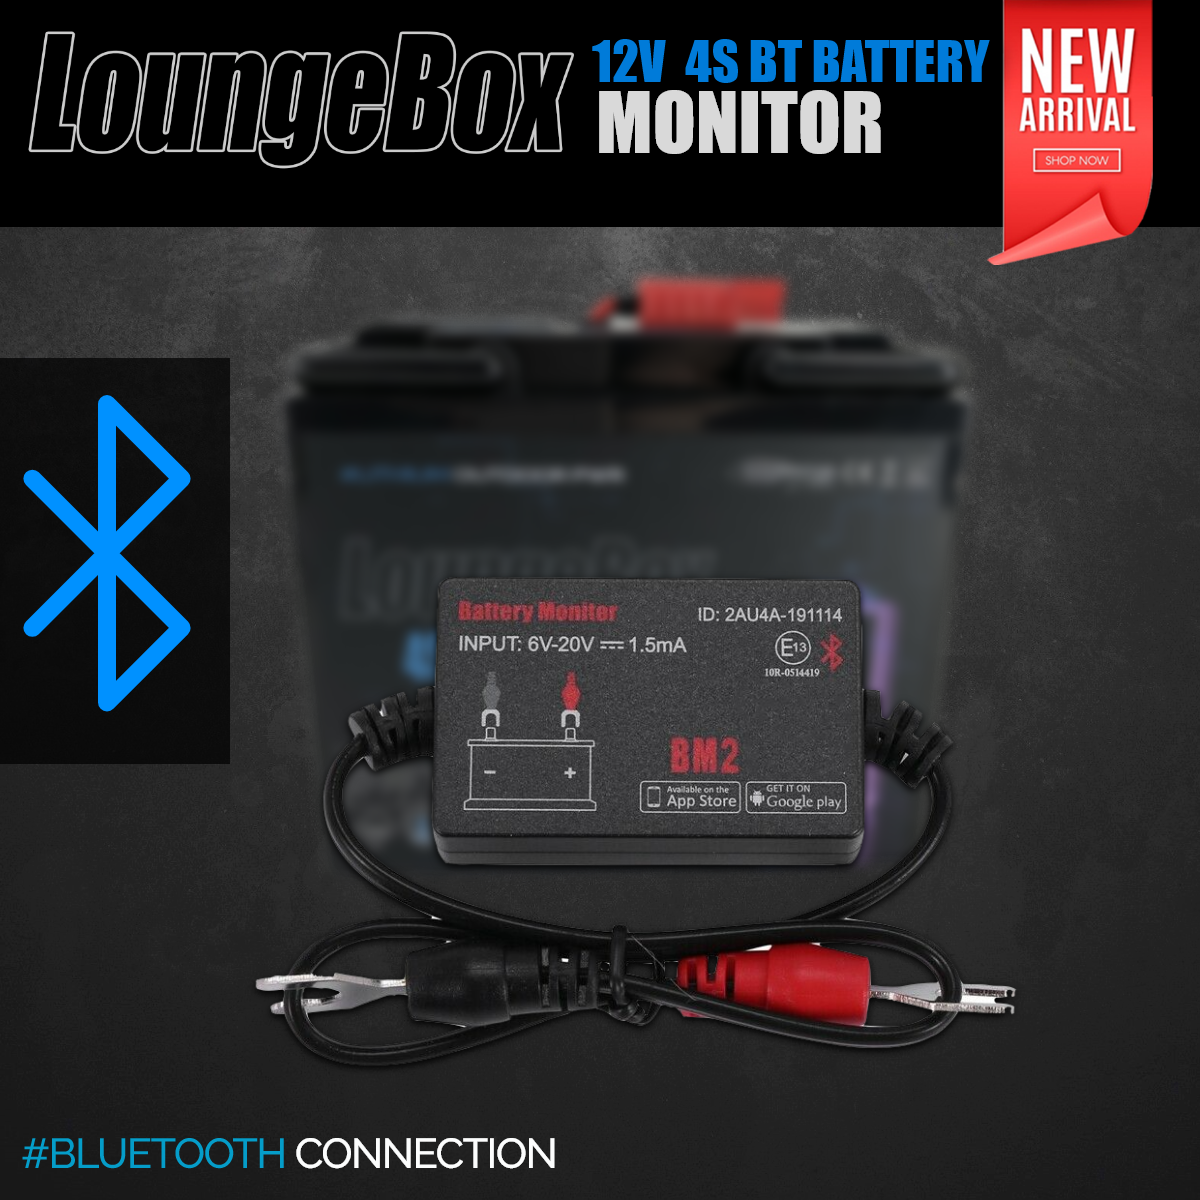 12V 4S Bluetooth Battery Monitor, OUTDOOR POWER ACCESSIORS & CABLES, OUTDOOR POWER, BAGS & CASES